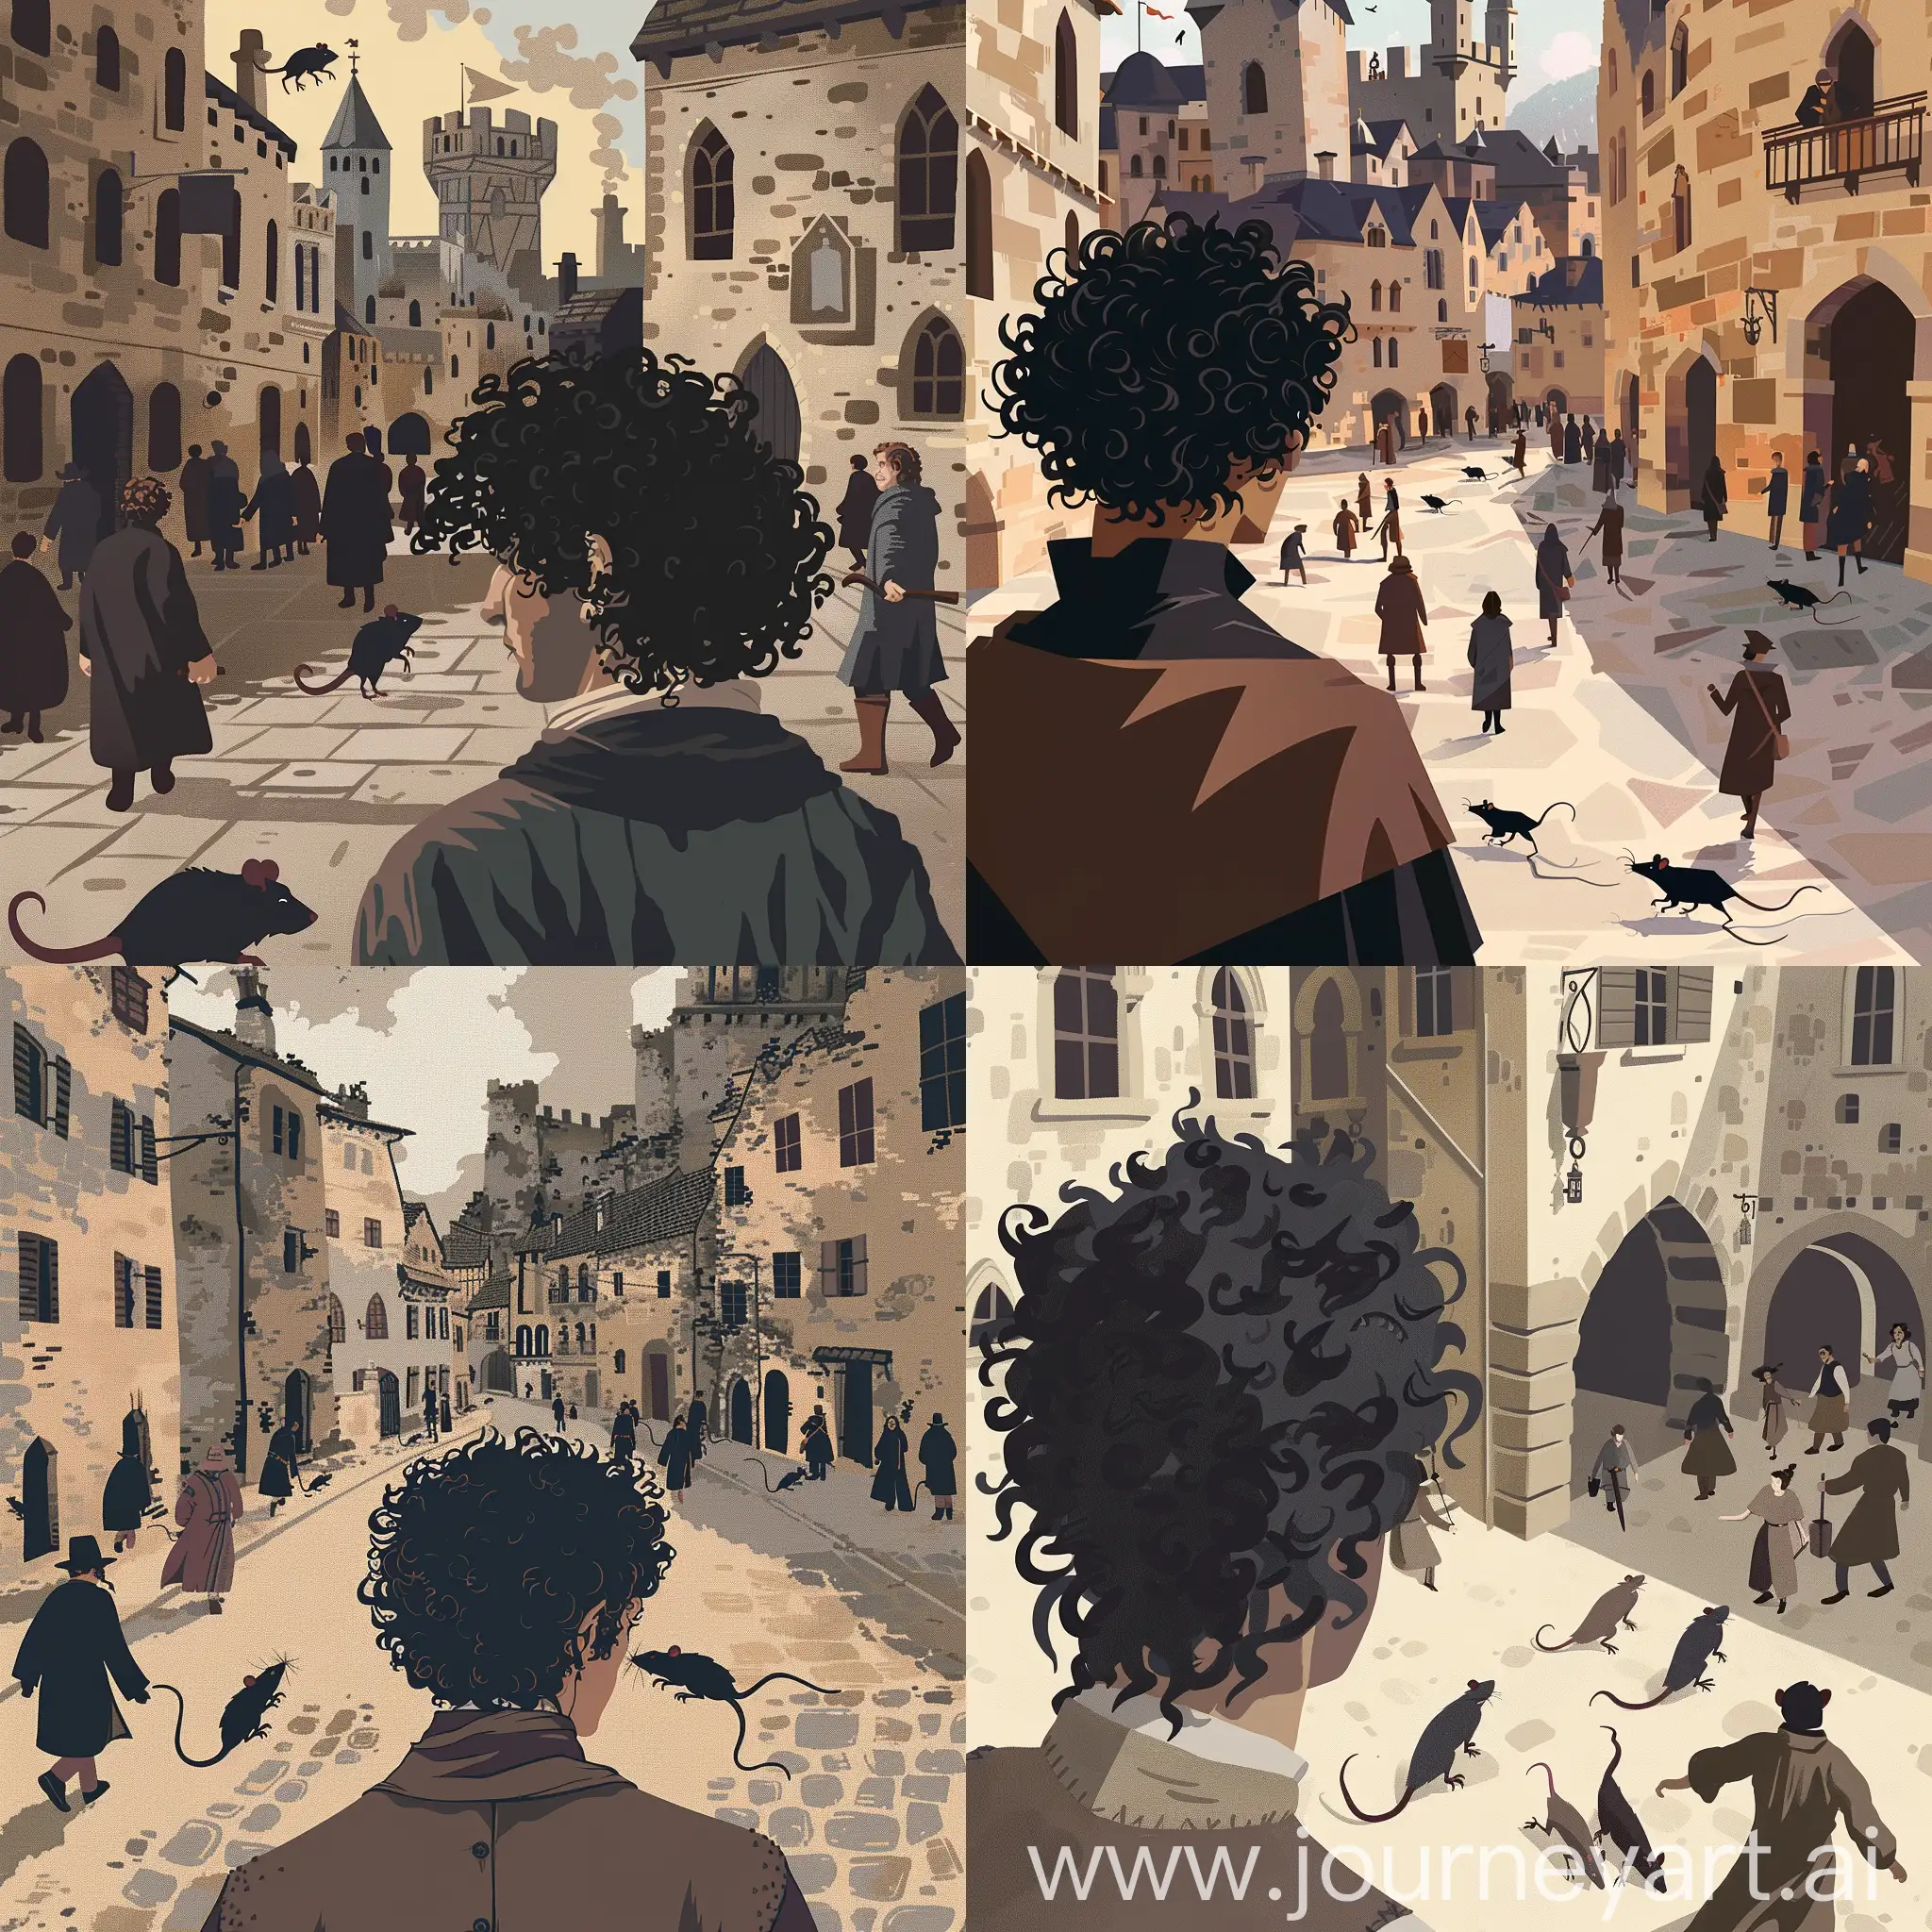 minimalistic illustration in swampy shades. stately man with black curly hair walking in a medieval town, citizens walking around, rats running on the sidewalk